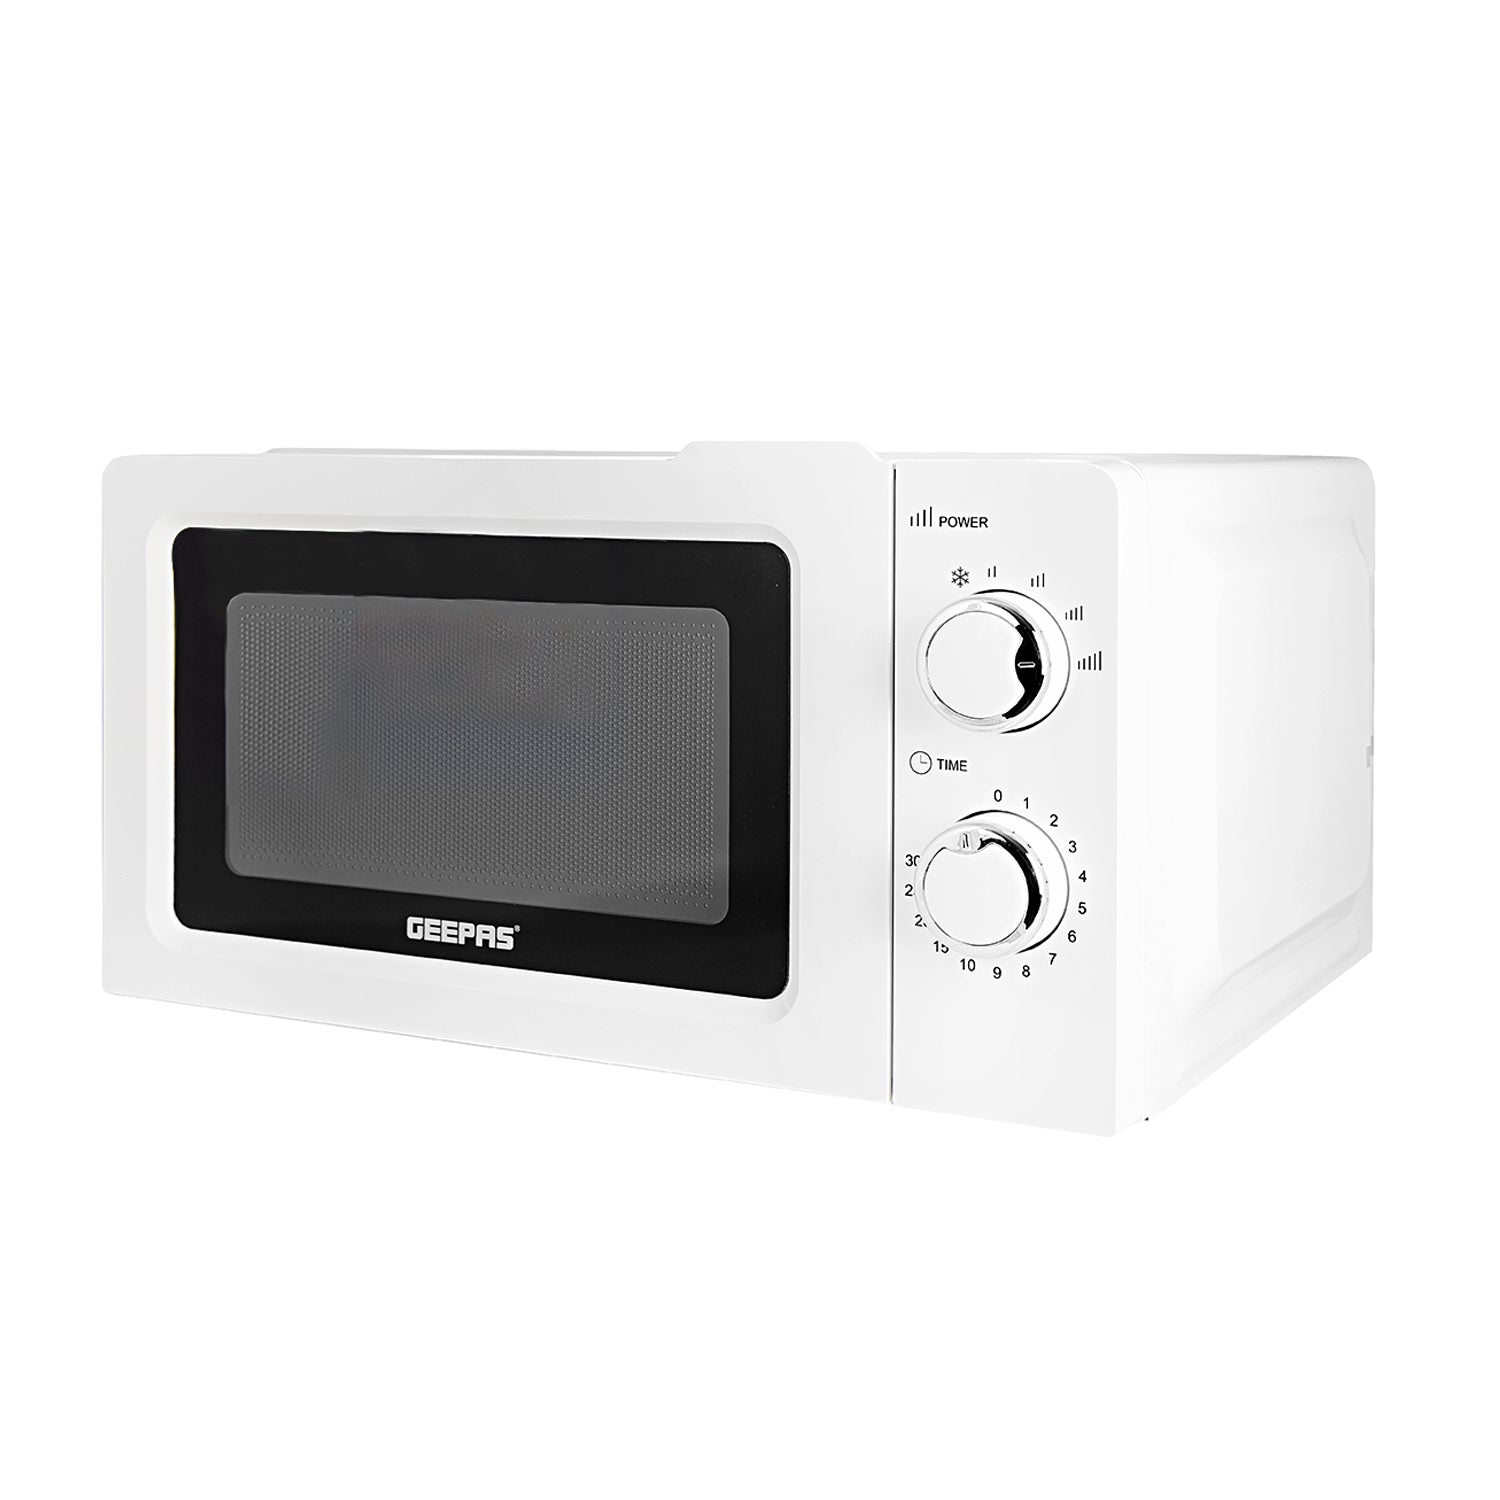 Photos - Microwave Geepas 20L Solo Freestanding White  Oven GMO1899 